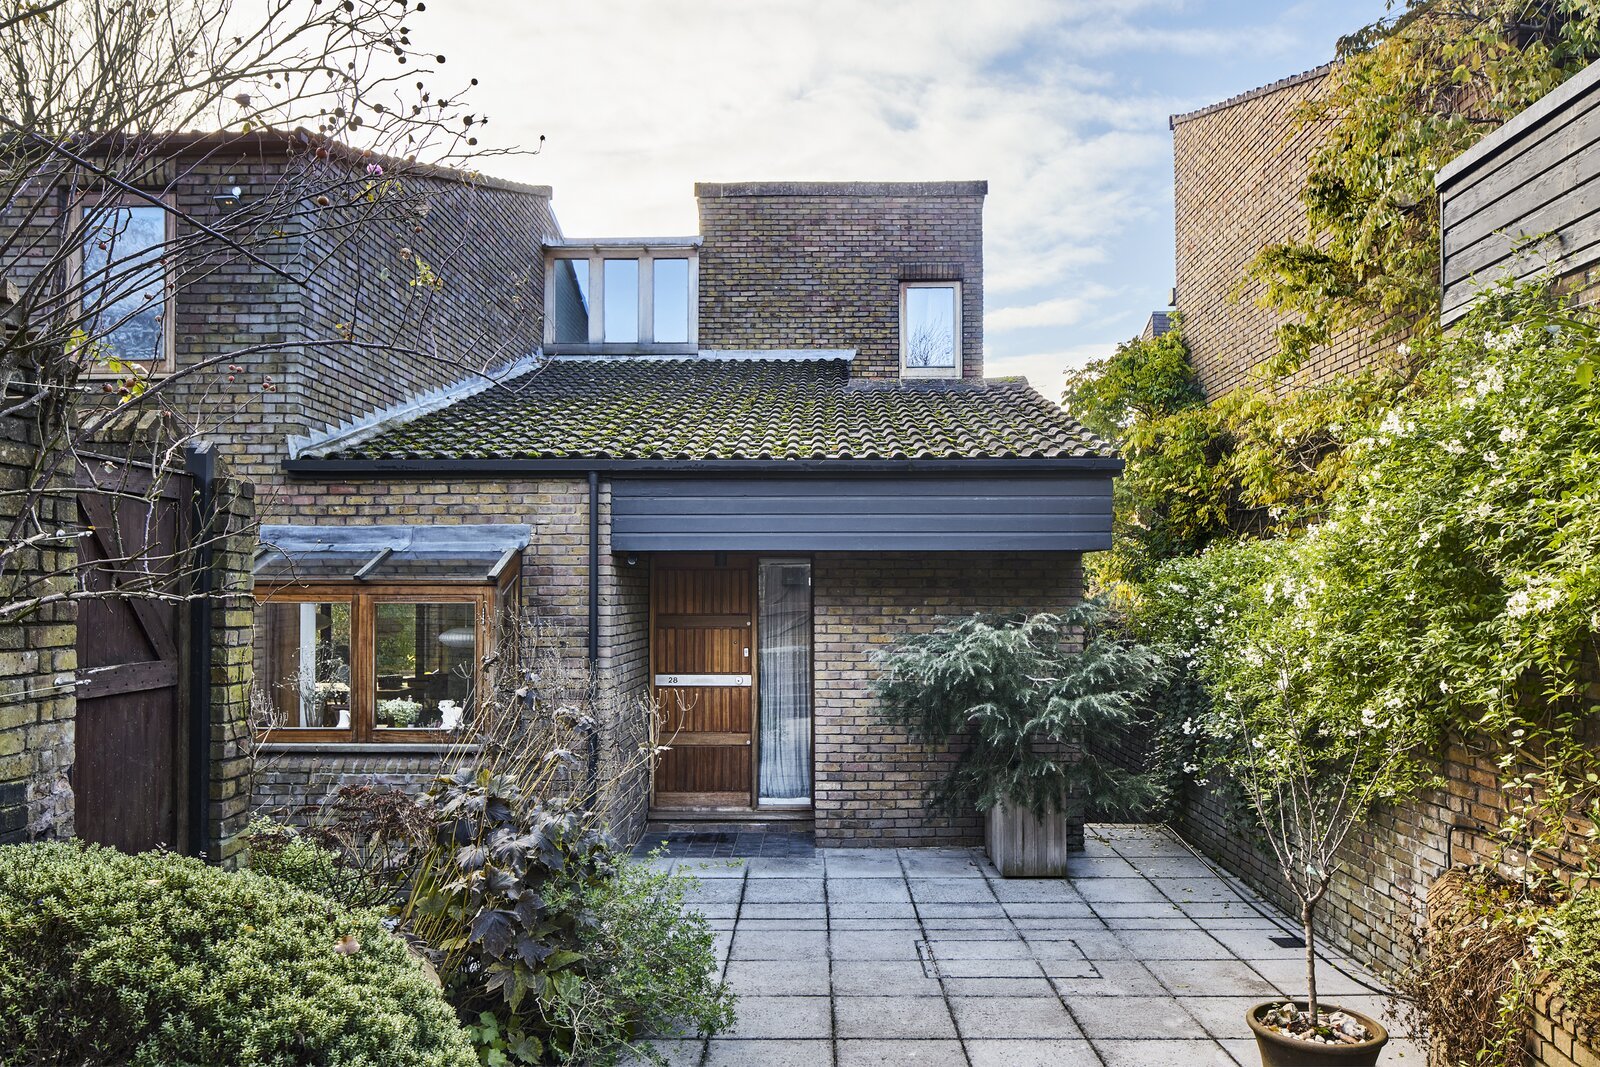 Listed for £5.3M, This Brick Home in London Is Surprisingly Light and Airy